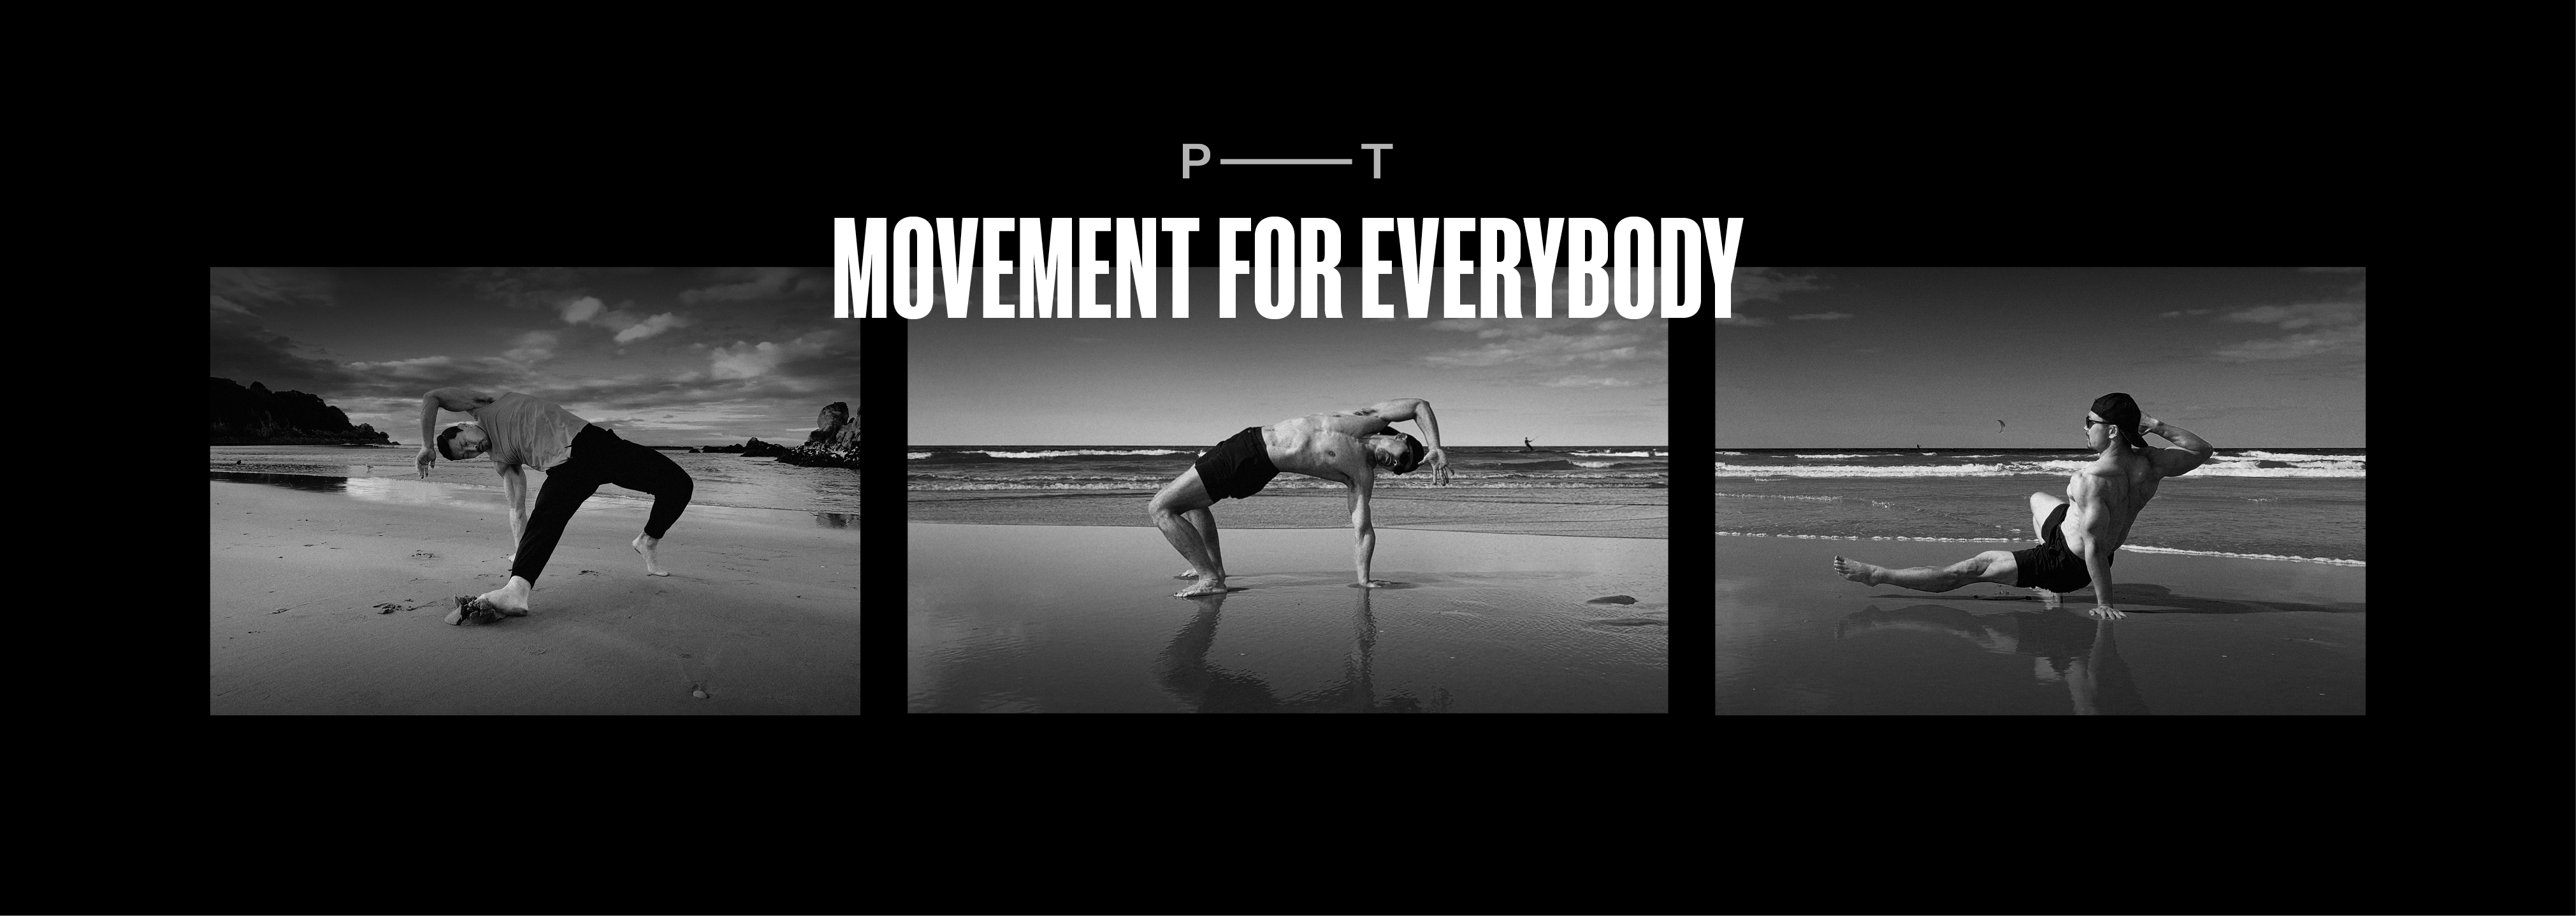 Movement for everybody